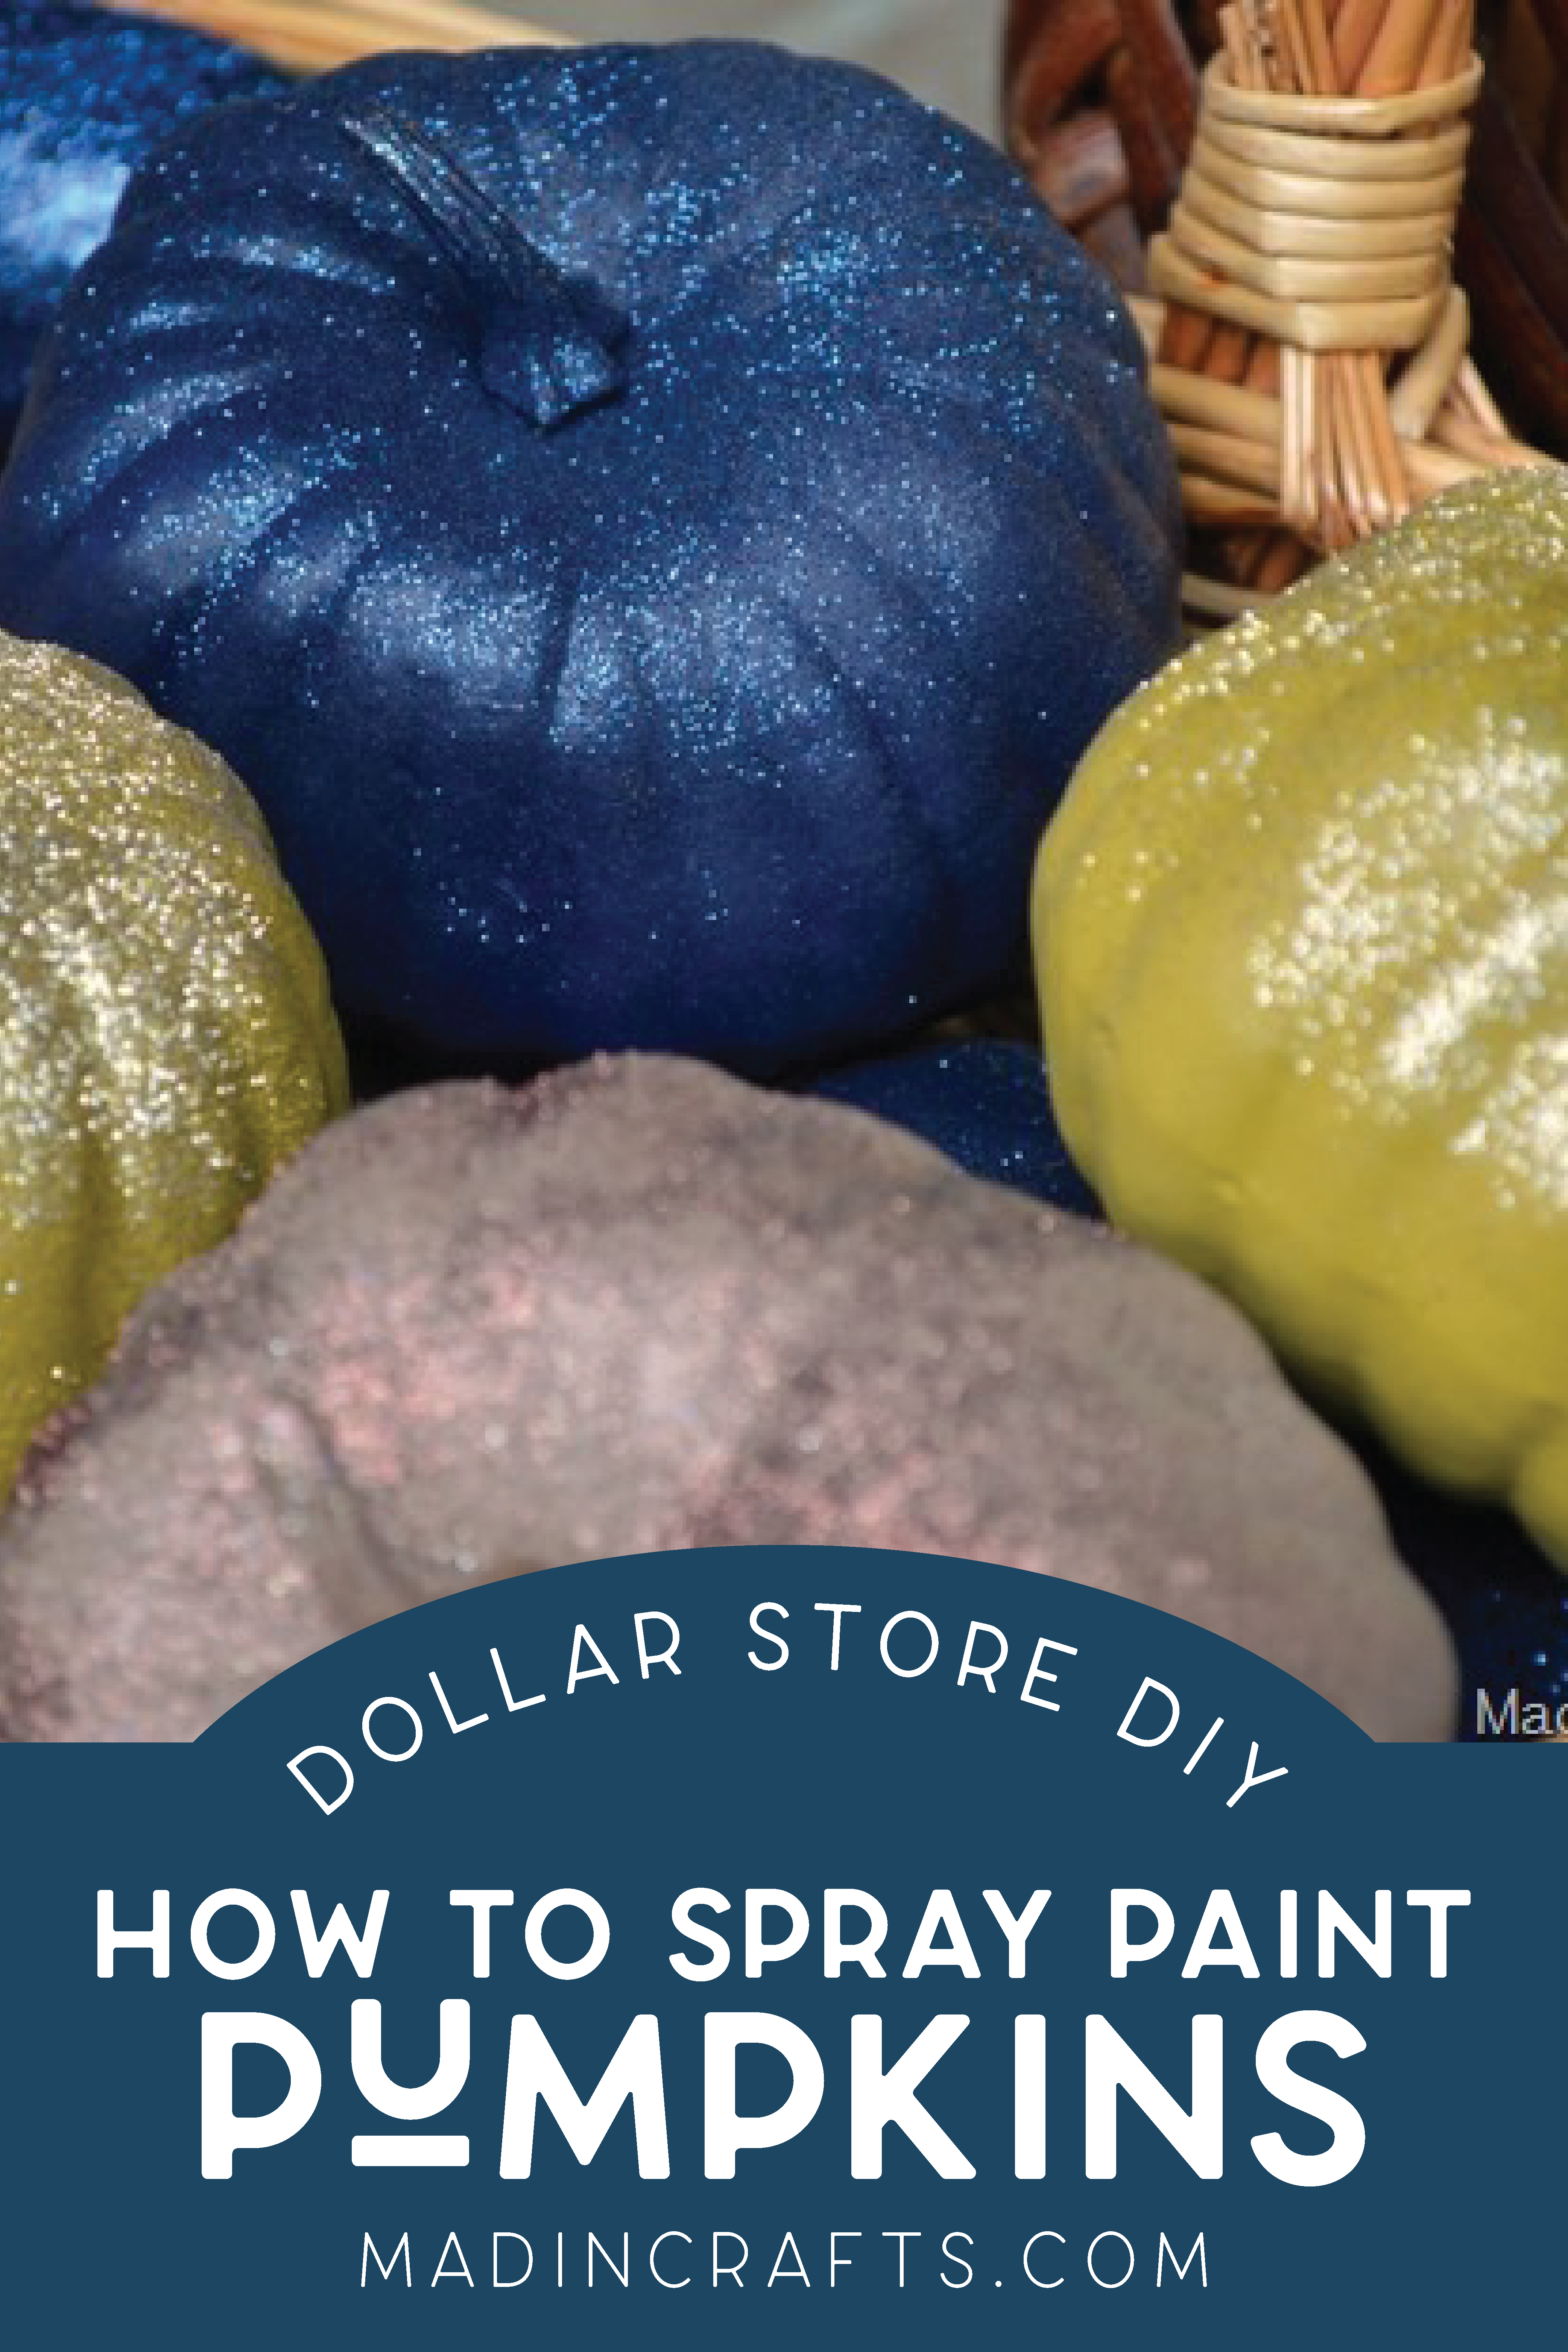 pumpkins spray painted blue, green, and tan